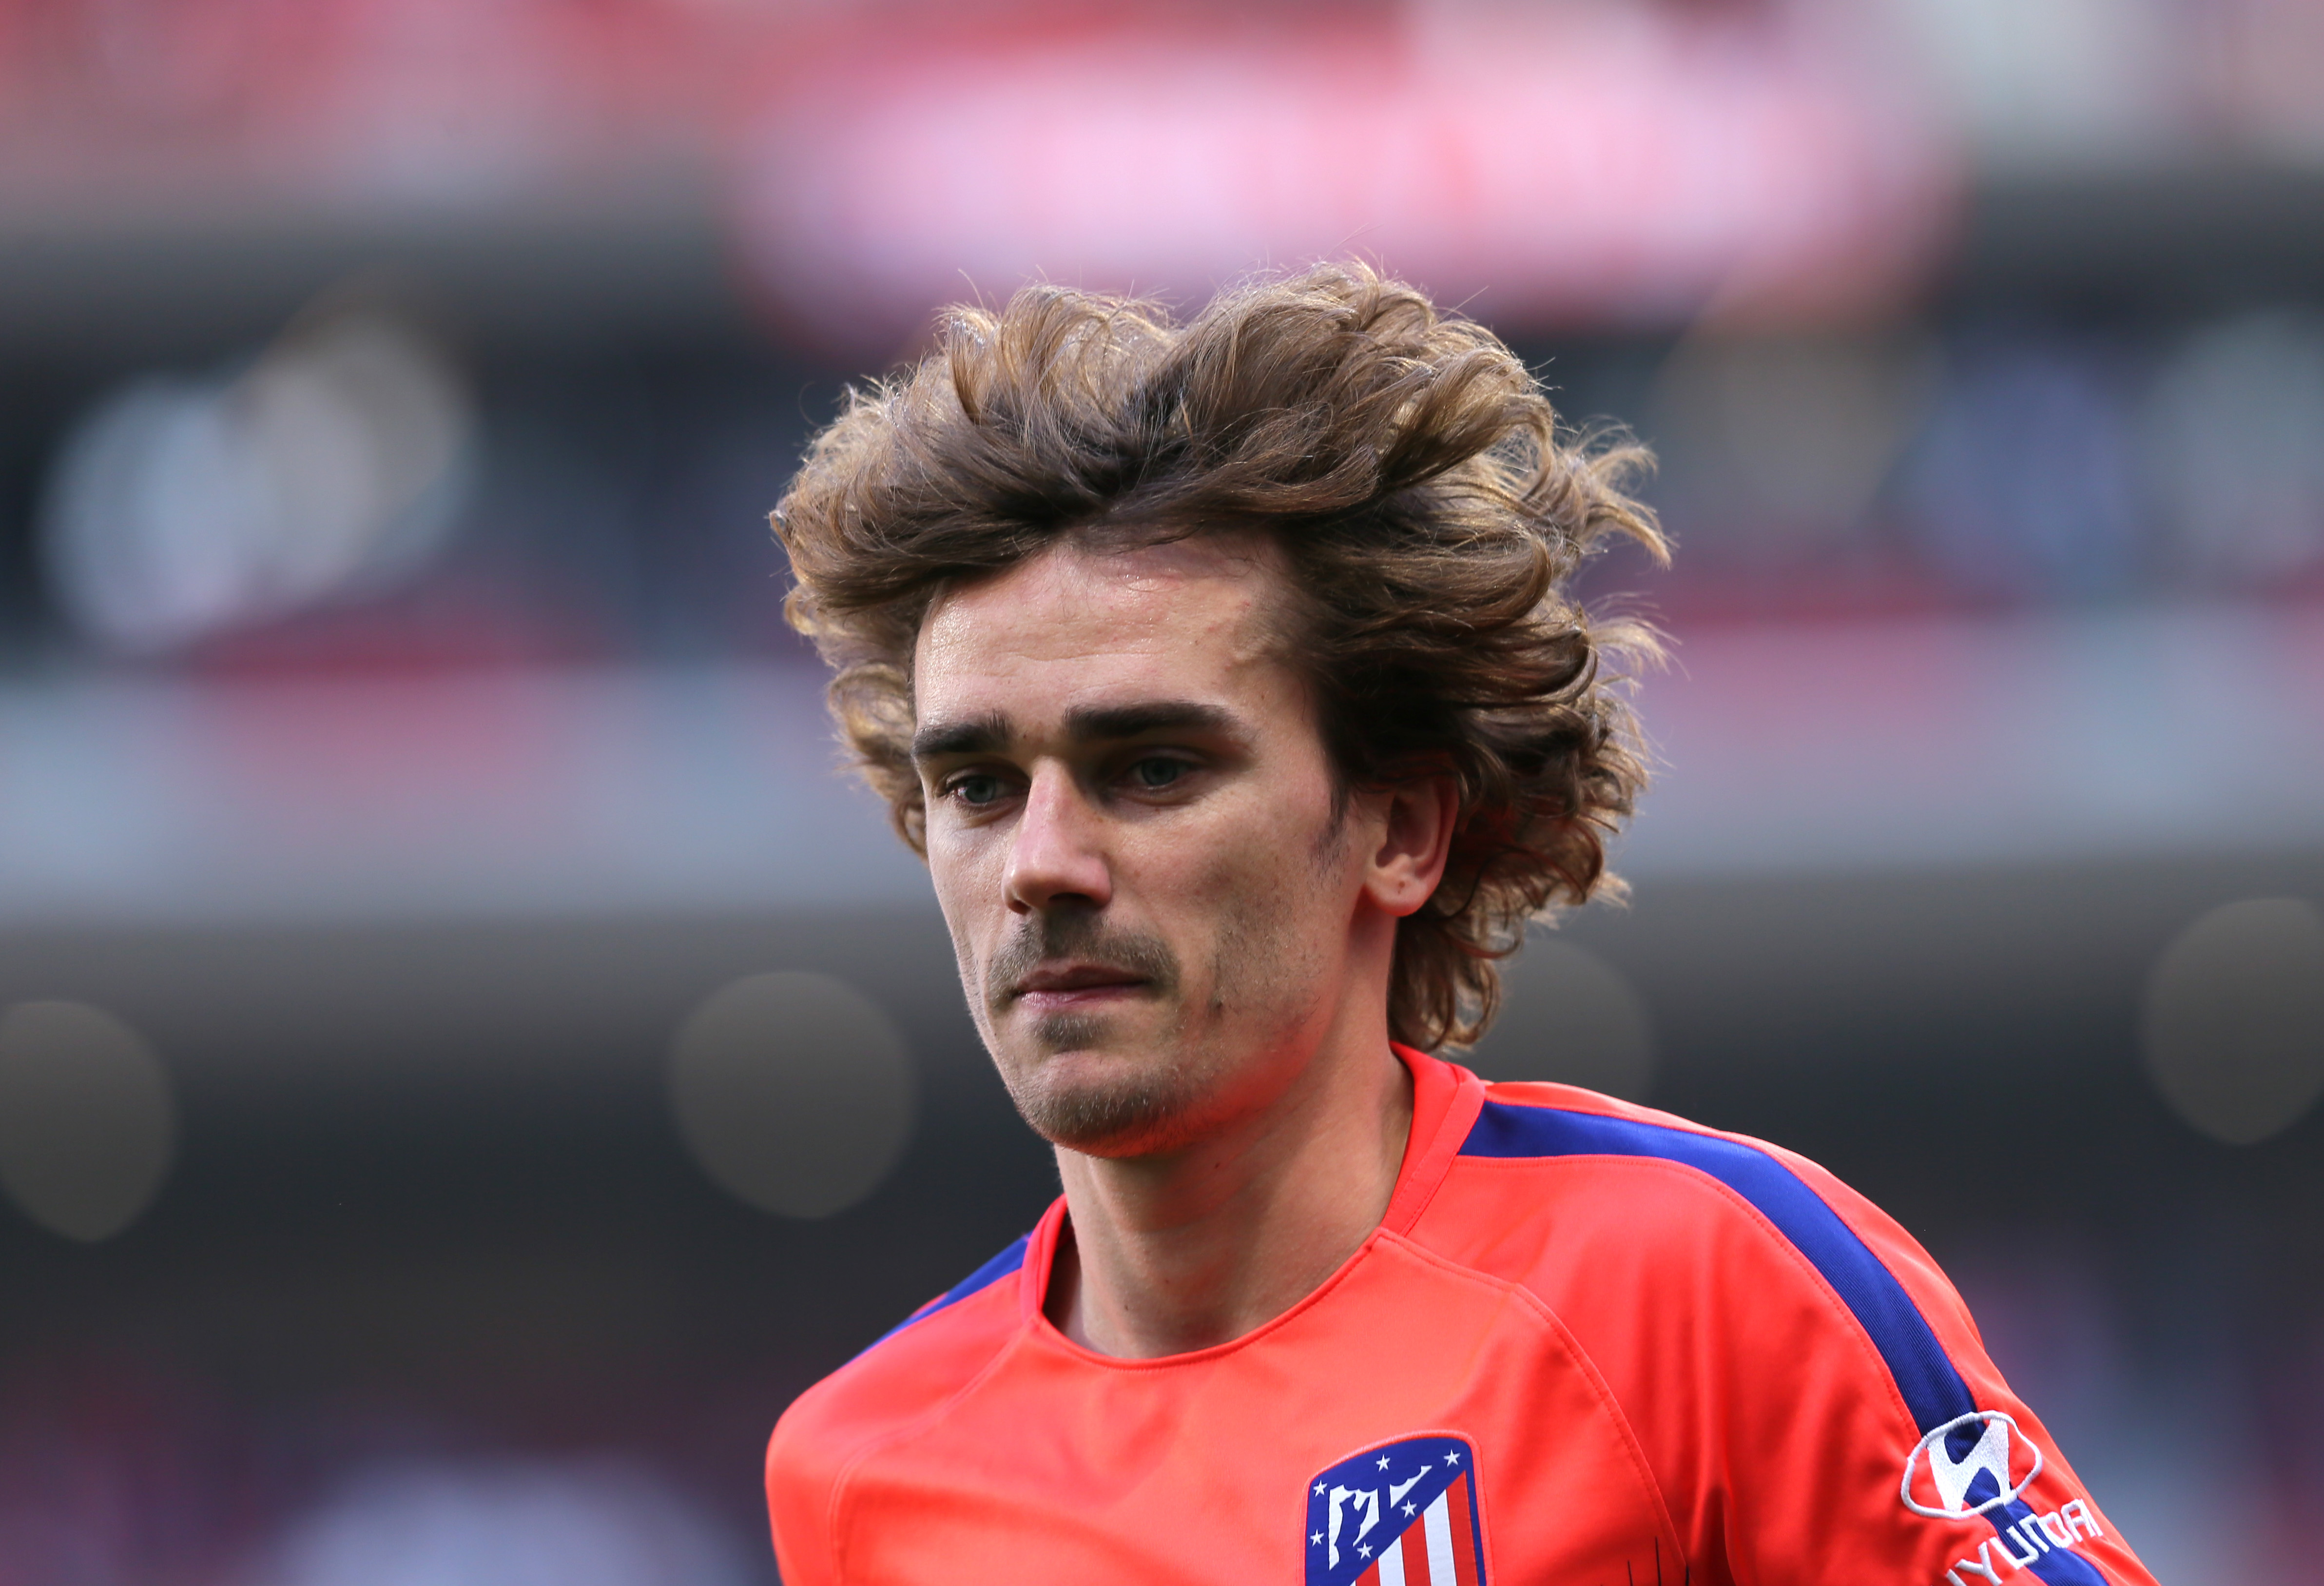 MADRID, SPAIN - APRIL 27: Antoine Griezmann of Atletico Madrid warms up during the La Liga match between  Club Atletico de Madrid and Real Valladolid CF at Wanda Metropolitano on April 27, 2019 in Madrid, Spain. (Photo by Gonzalo Arroyo Moreno/Getty Images)